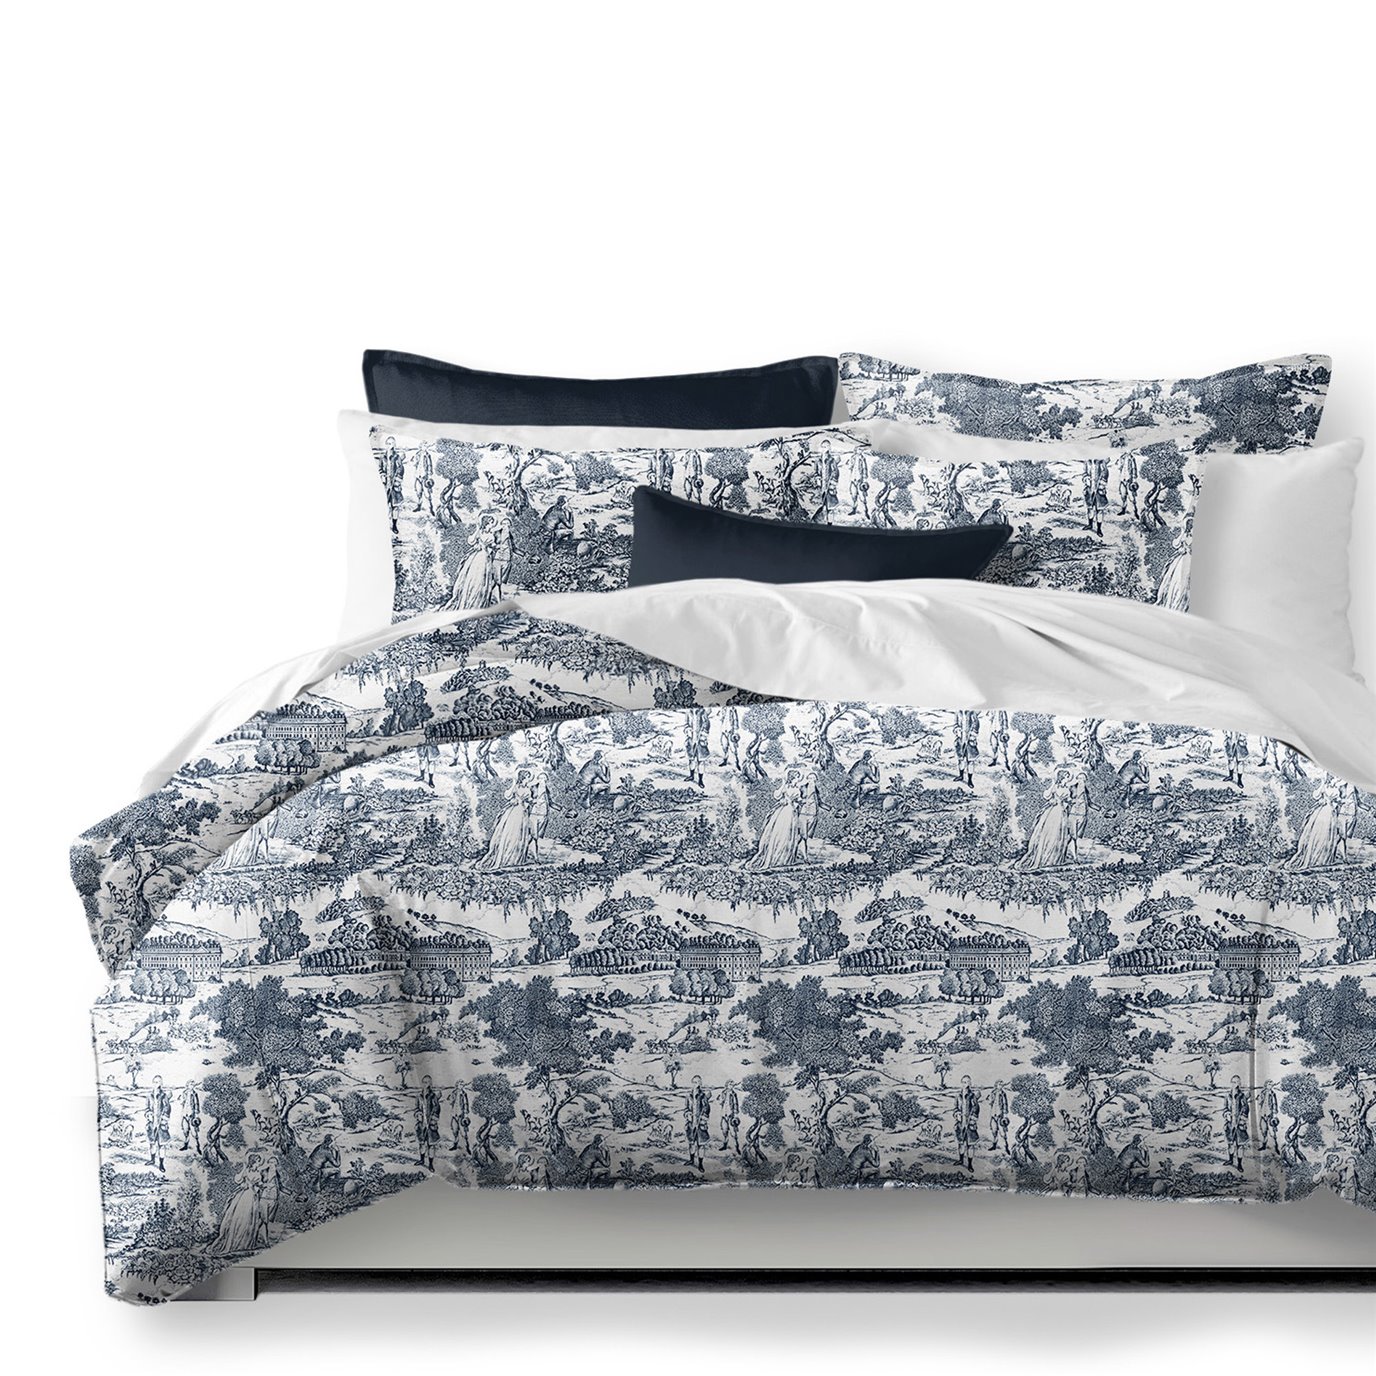 Beau Toile Blue Coverlet and Pillow Sham(s) Set - Size Super Queen